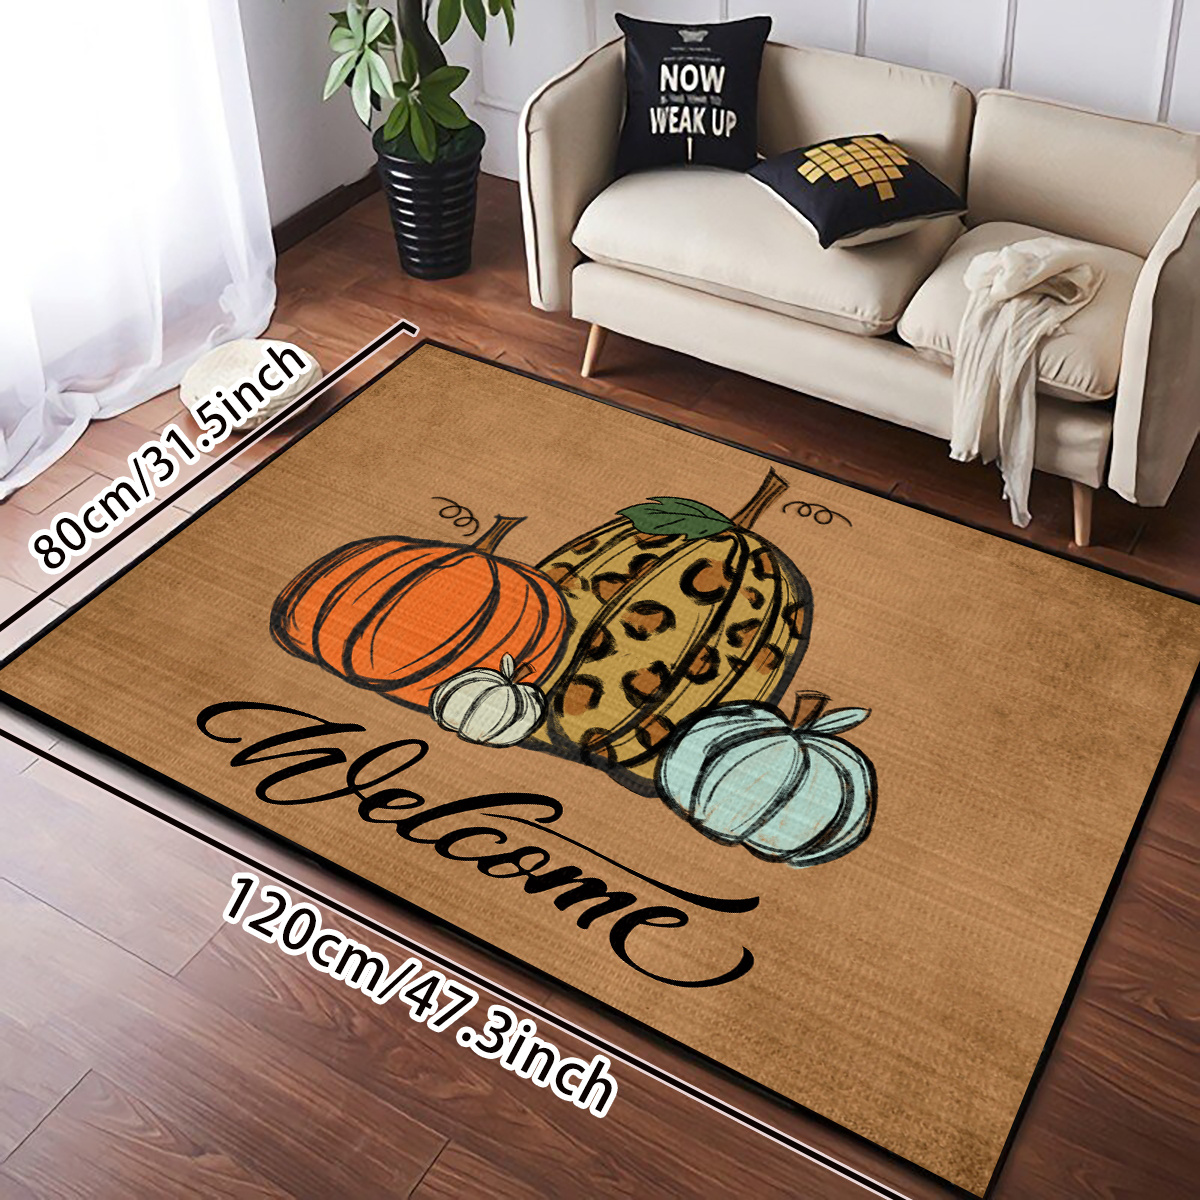 Rain boots on home sweet Home door mat during fall rainy season. Entrance  doormat of house homeowner. Top view of rug for floor protection of rain  water during autumn, Stock image